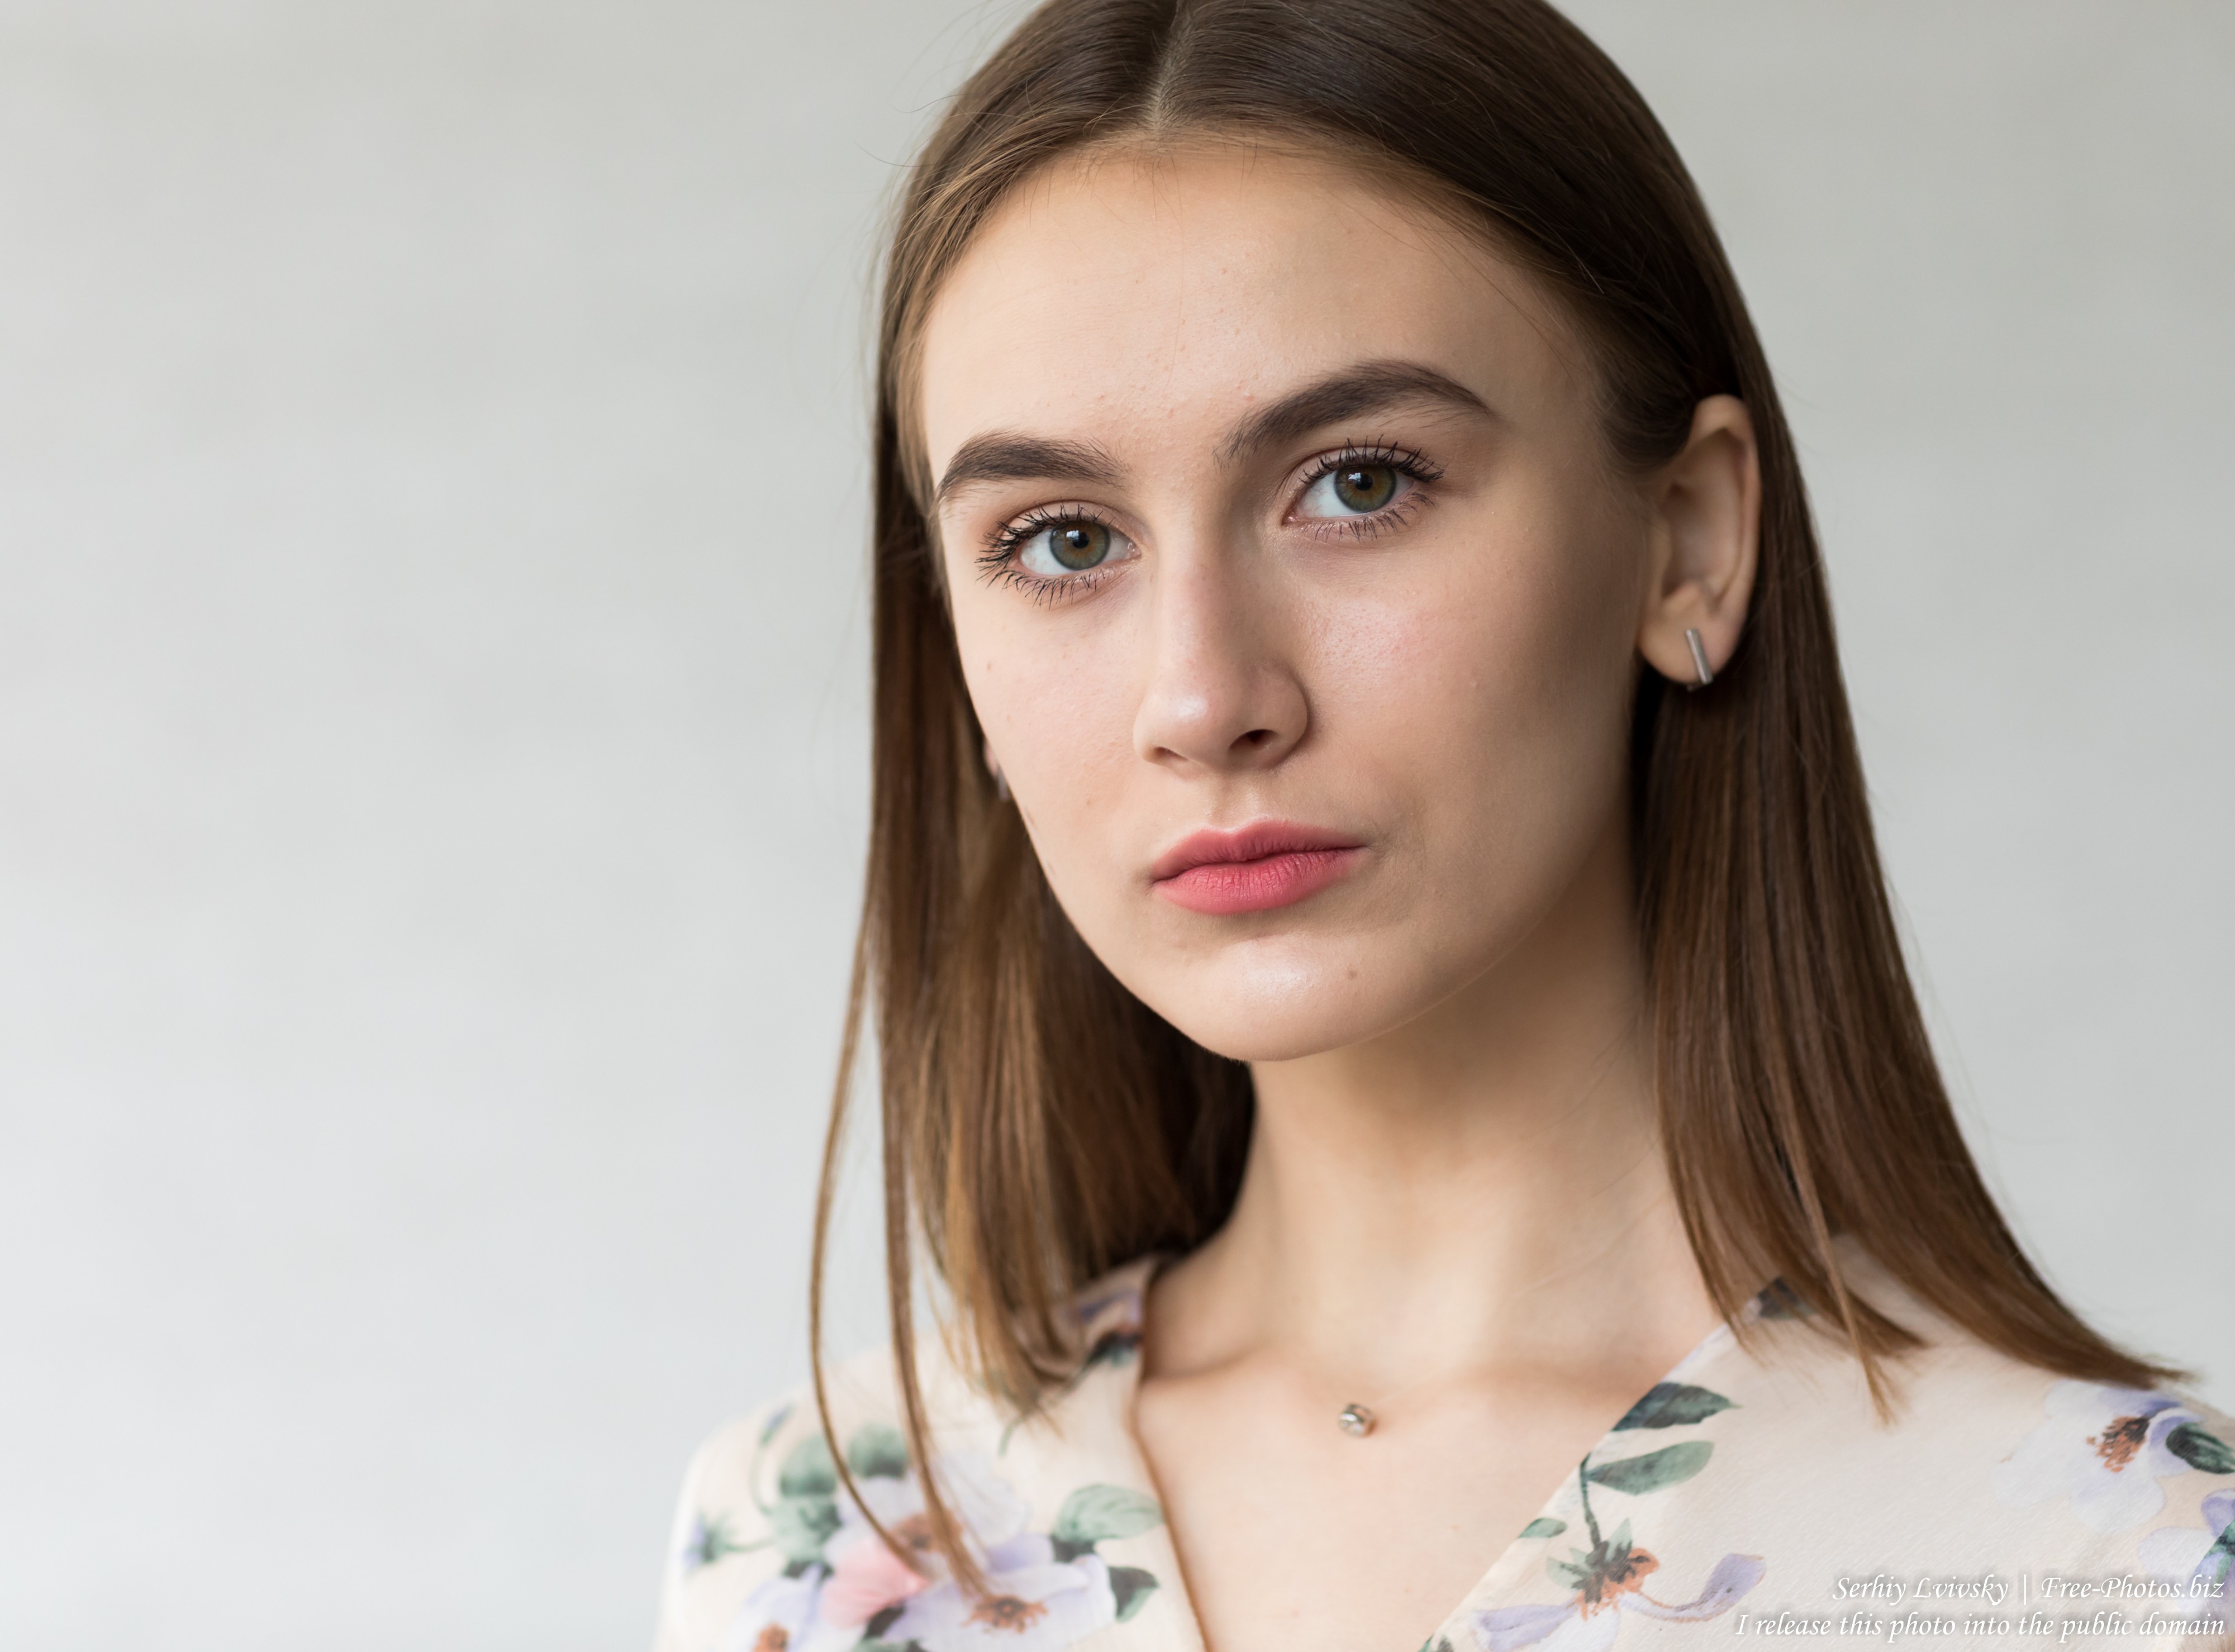 Julia - a 15-year-old girl photographed in July 2019 by Serhiy Lvivsky, picture 2